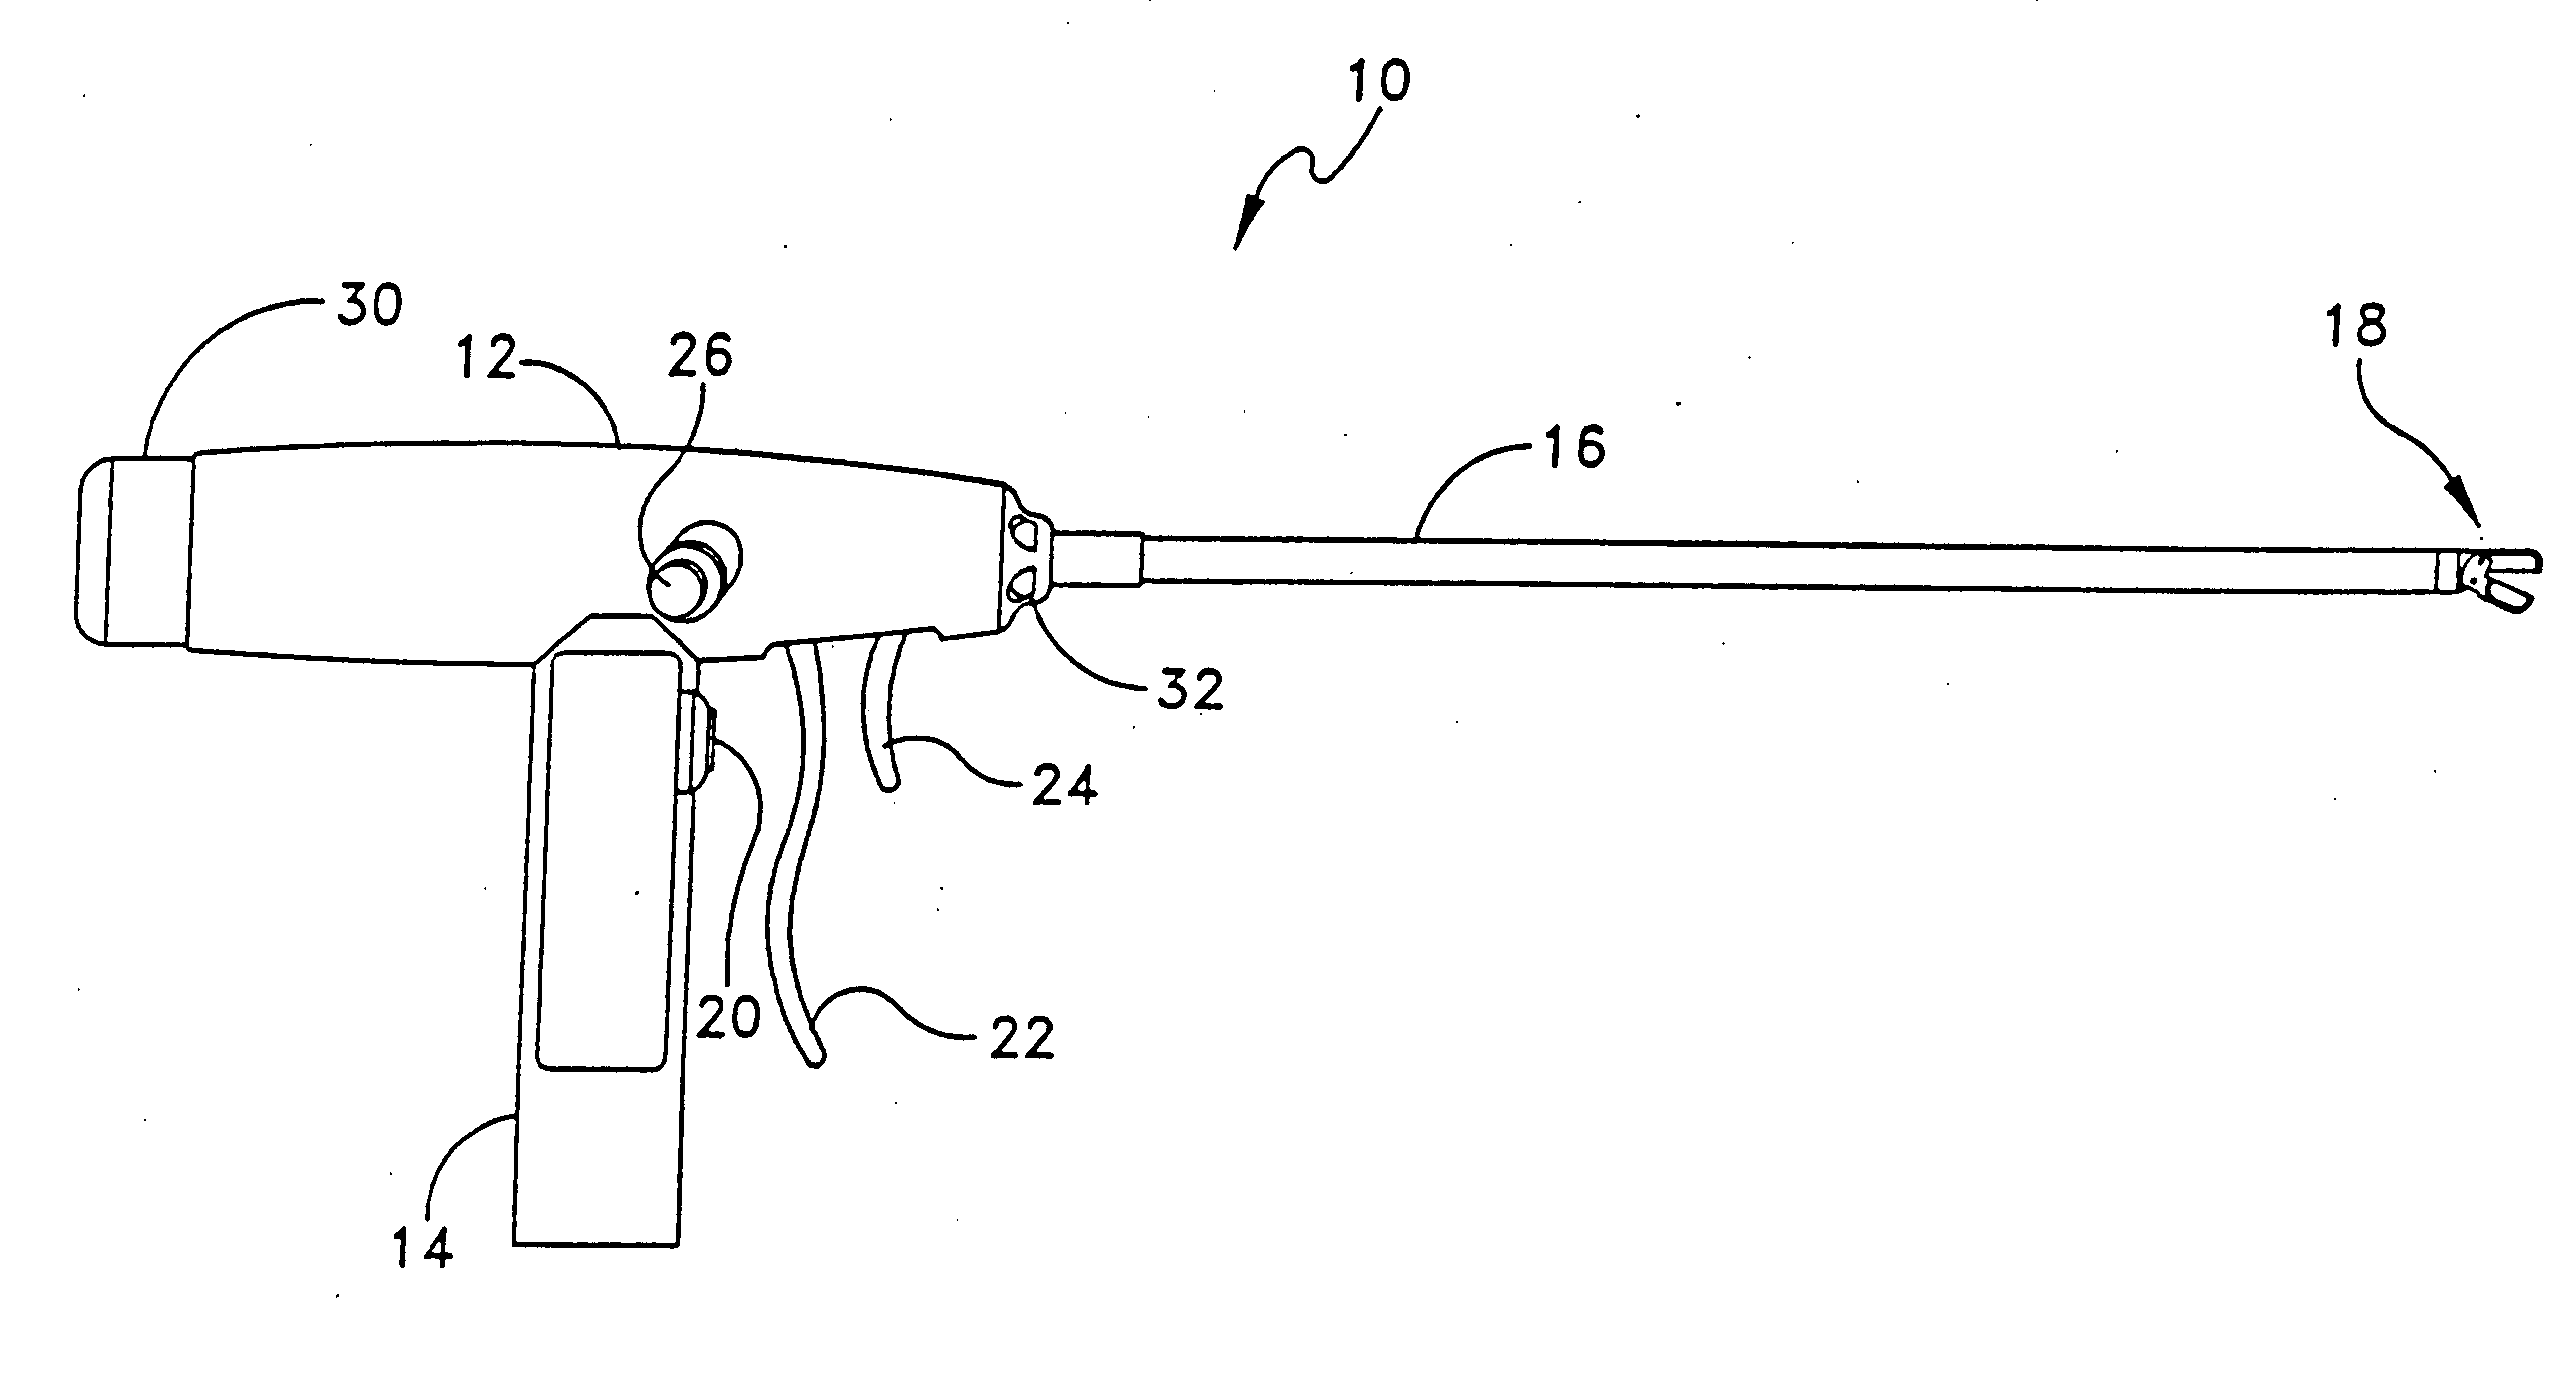 Surgical suturing instrument and method of use